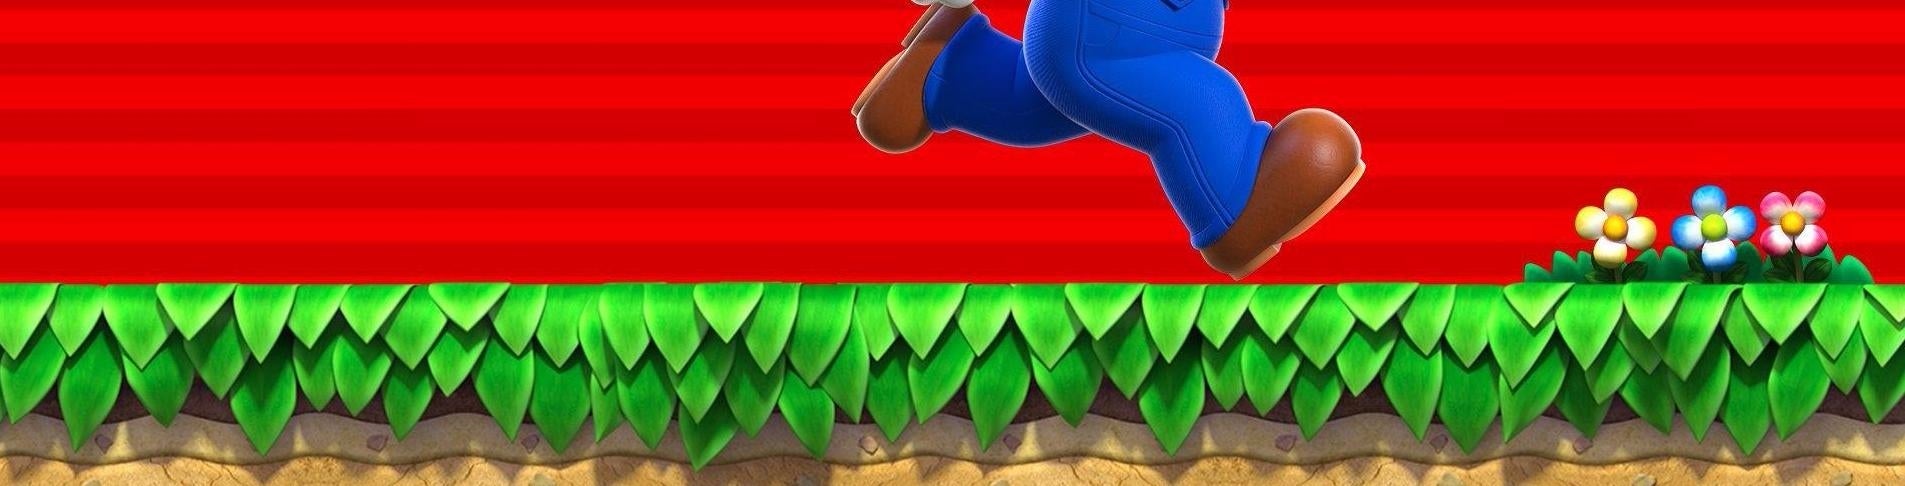 Image for Super Mario Run sees Nintendo's mascot leap confidently onto iPhone